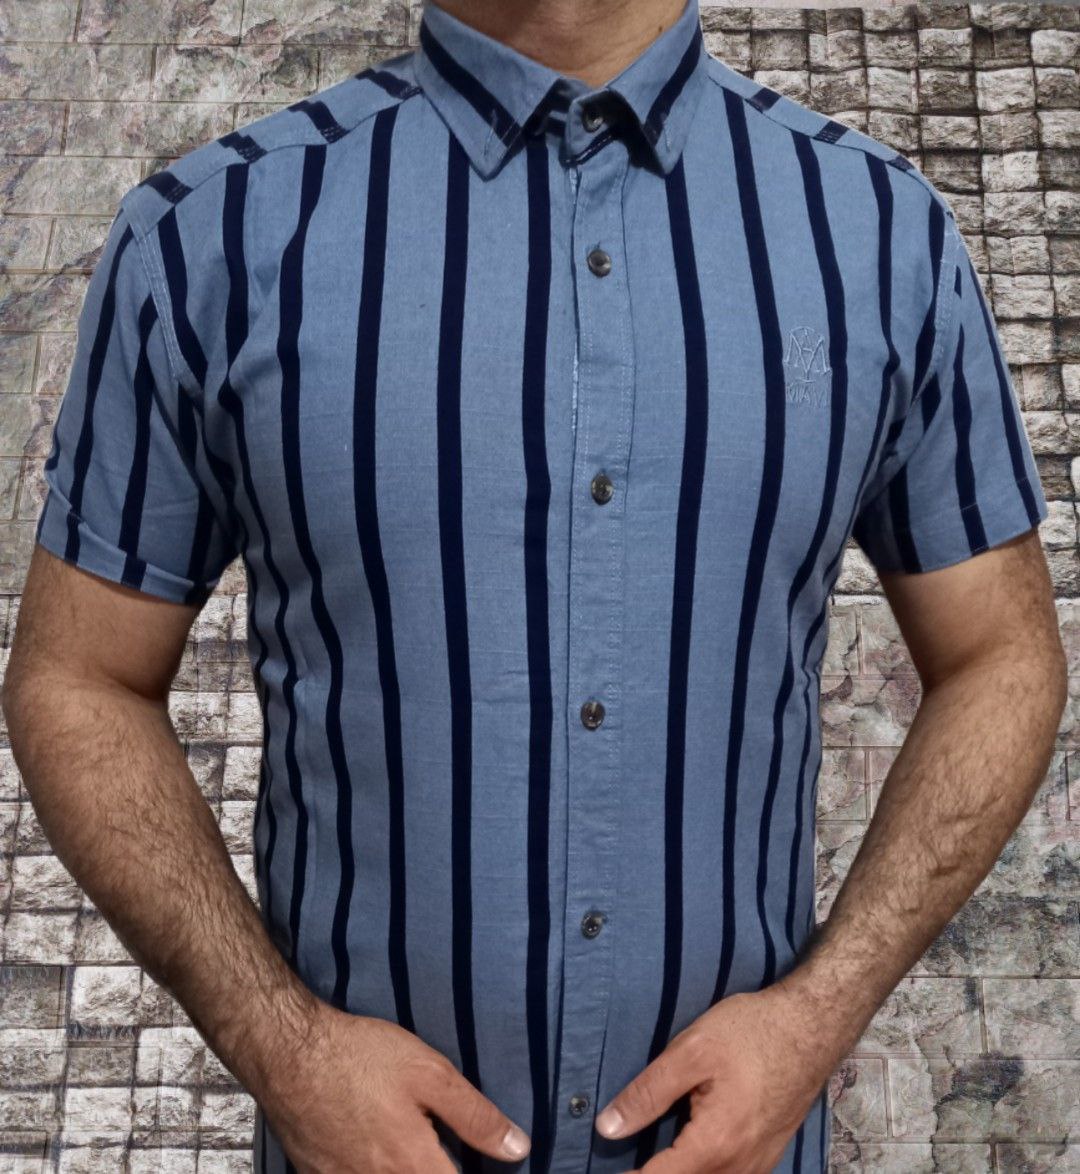 An enzyme cotton cotton shirt with color and size